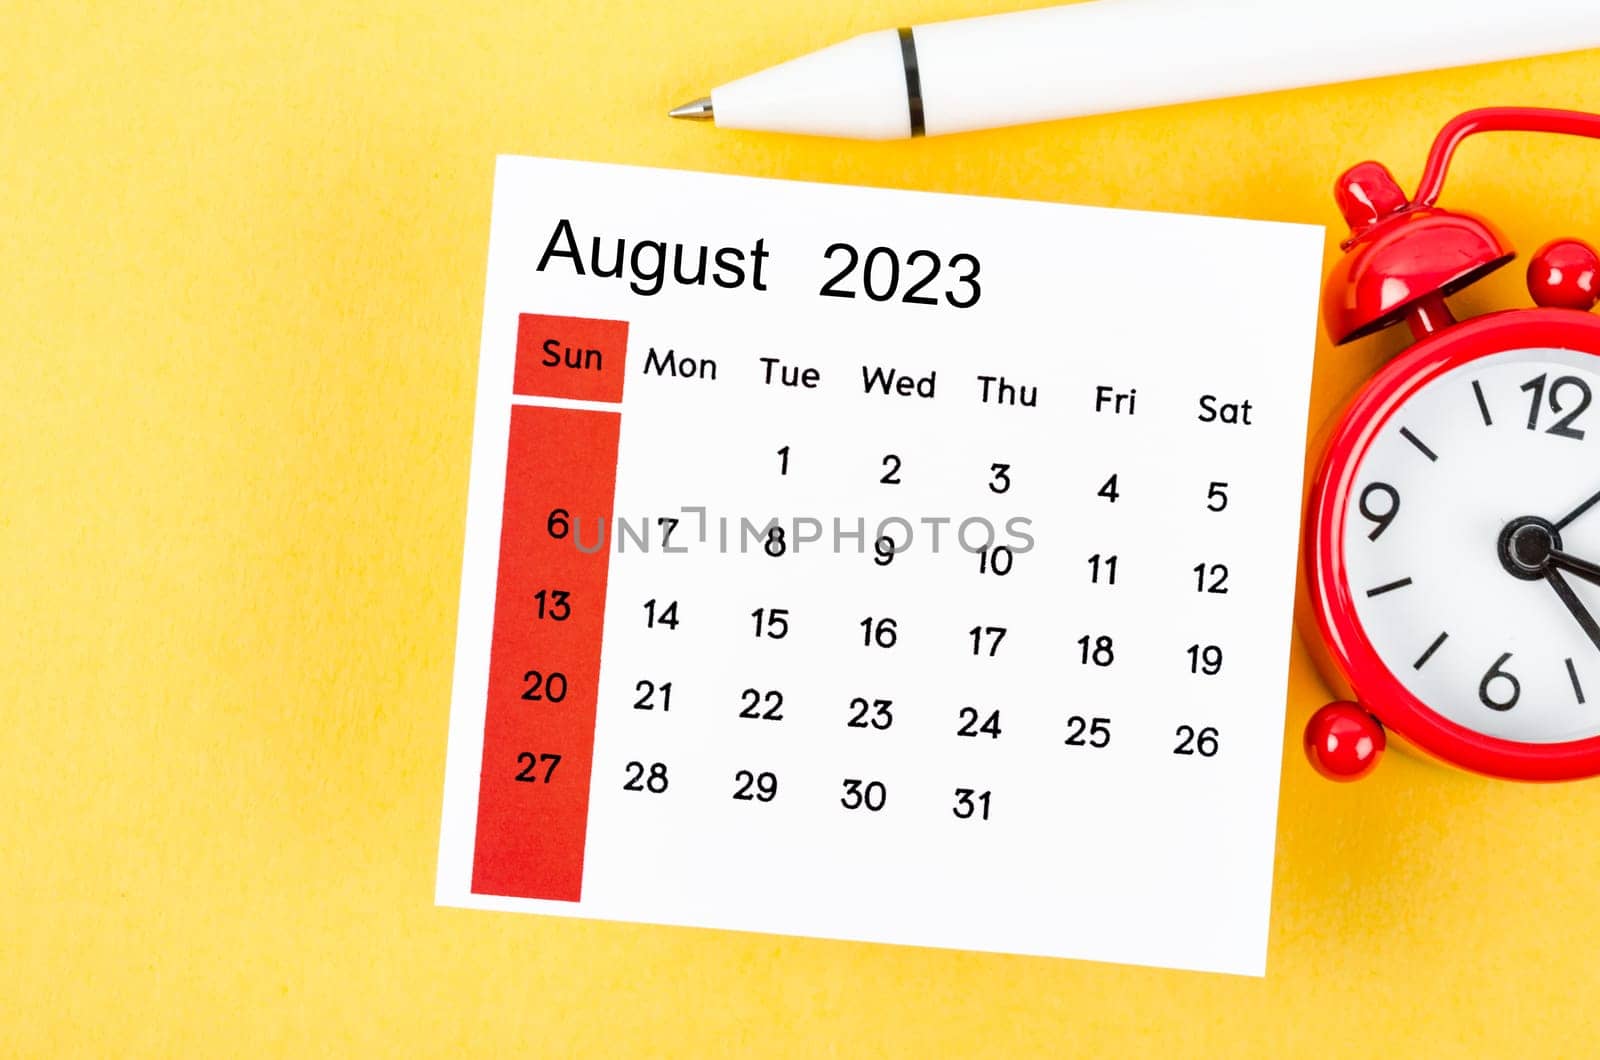 The August 2023 Monthly calendar for 2023 year with alarm clock on yellow background. by Gamjai